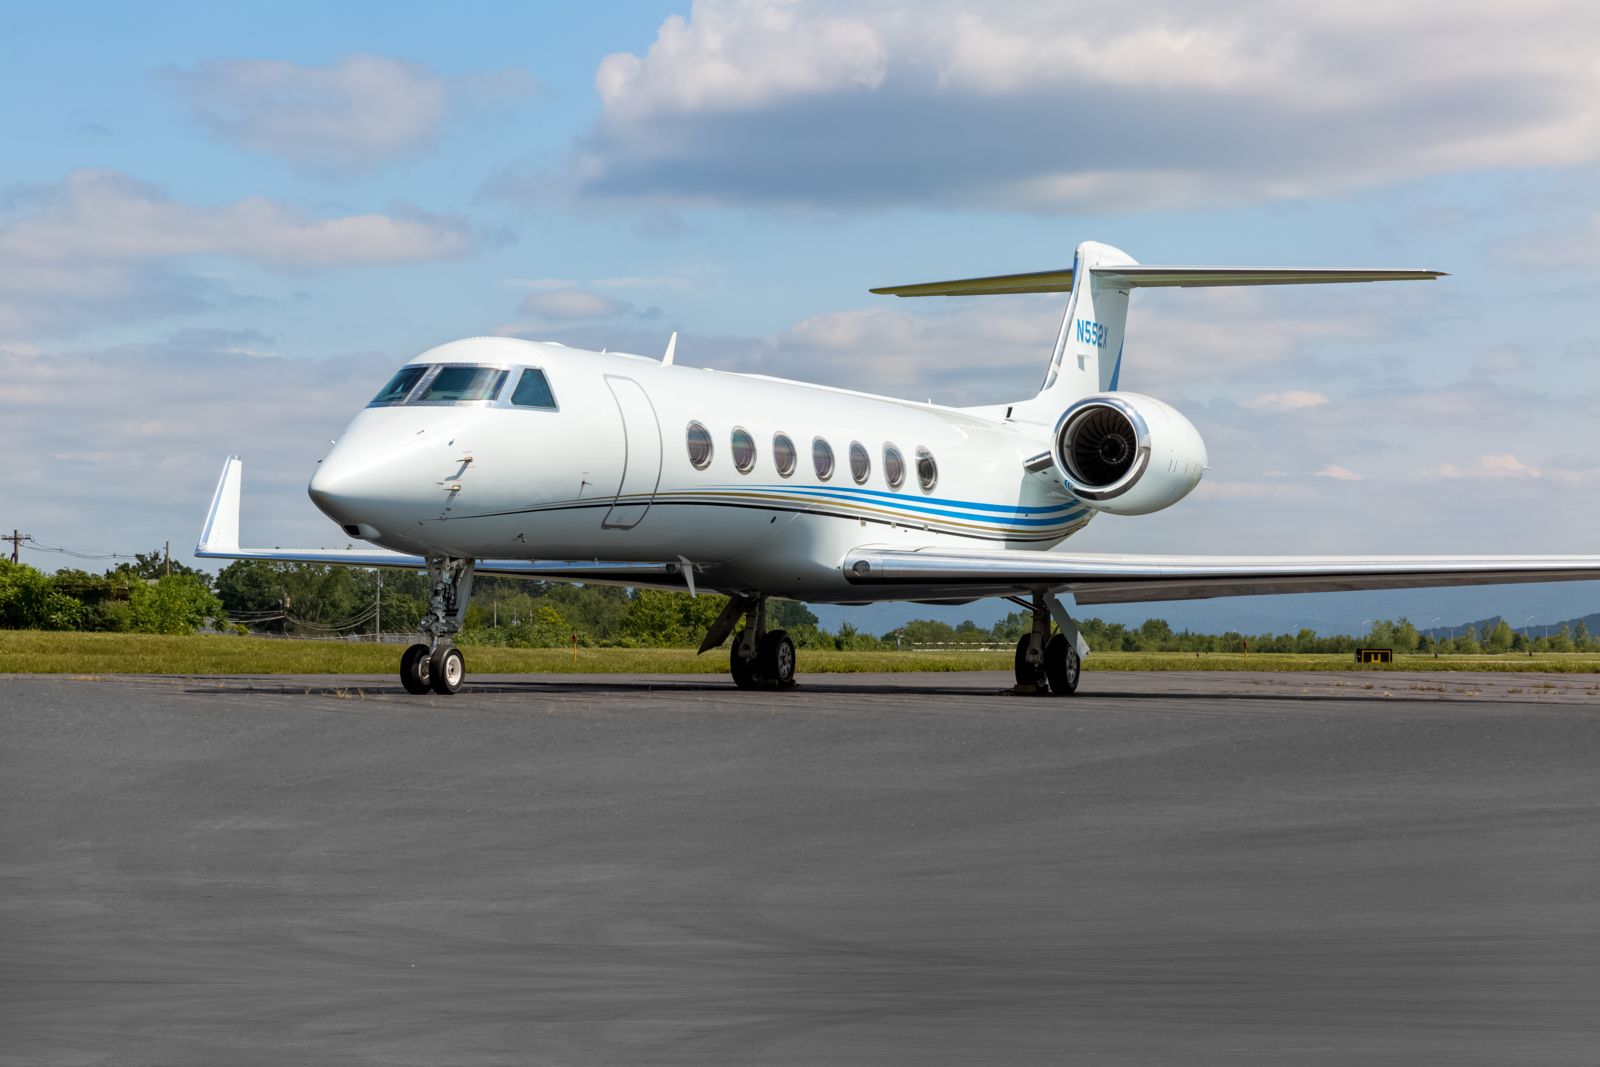 Gulfstream G550  S/N 5390 for sale | gallery image: /userfiles/images/aircraft-listing/Gulfstream_G550_sn5390/bfp_7907.jpg